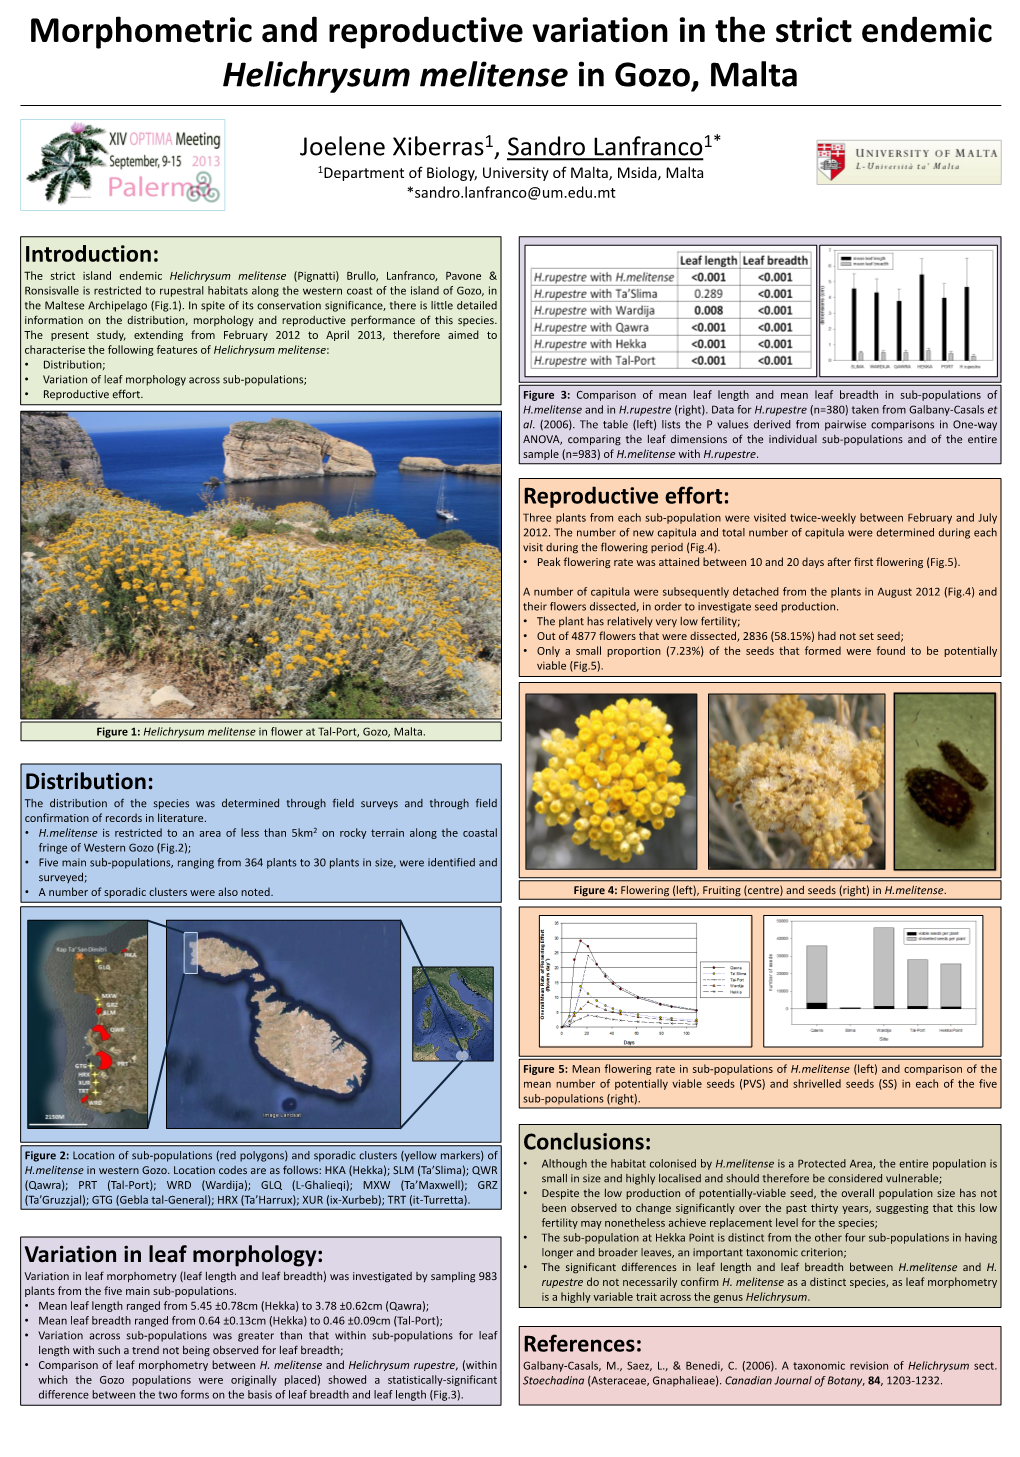 Morphometric and Reproductive Variation in the Strict Endemic Helichrysum Melitense in Gozo, Malta